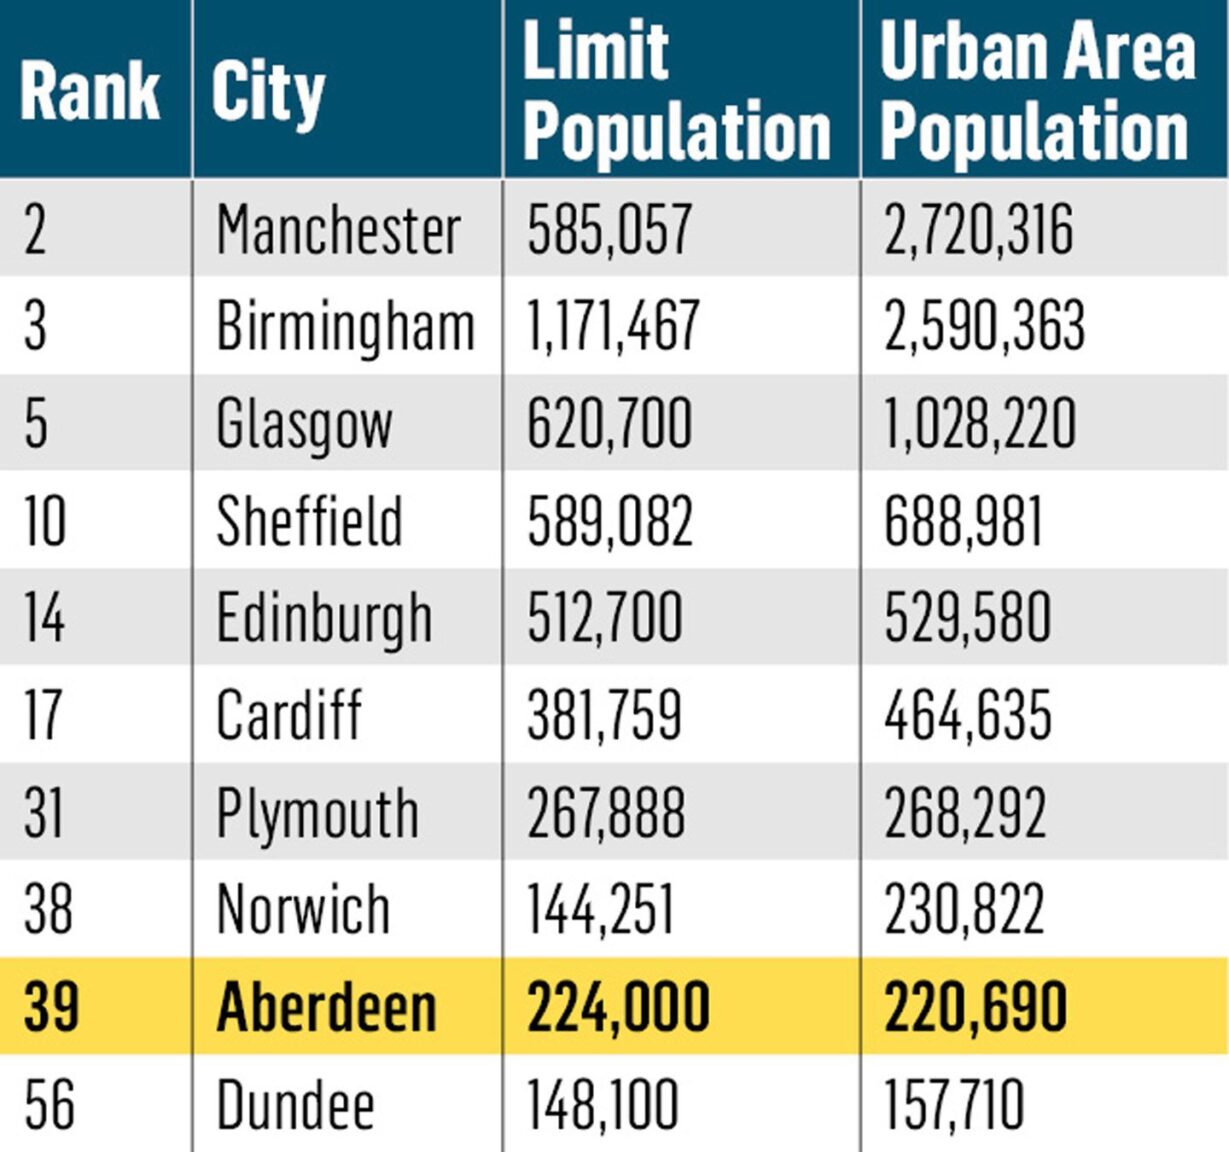 How do global experts rank Aberdeen against other cities?